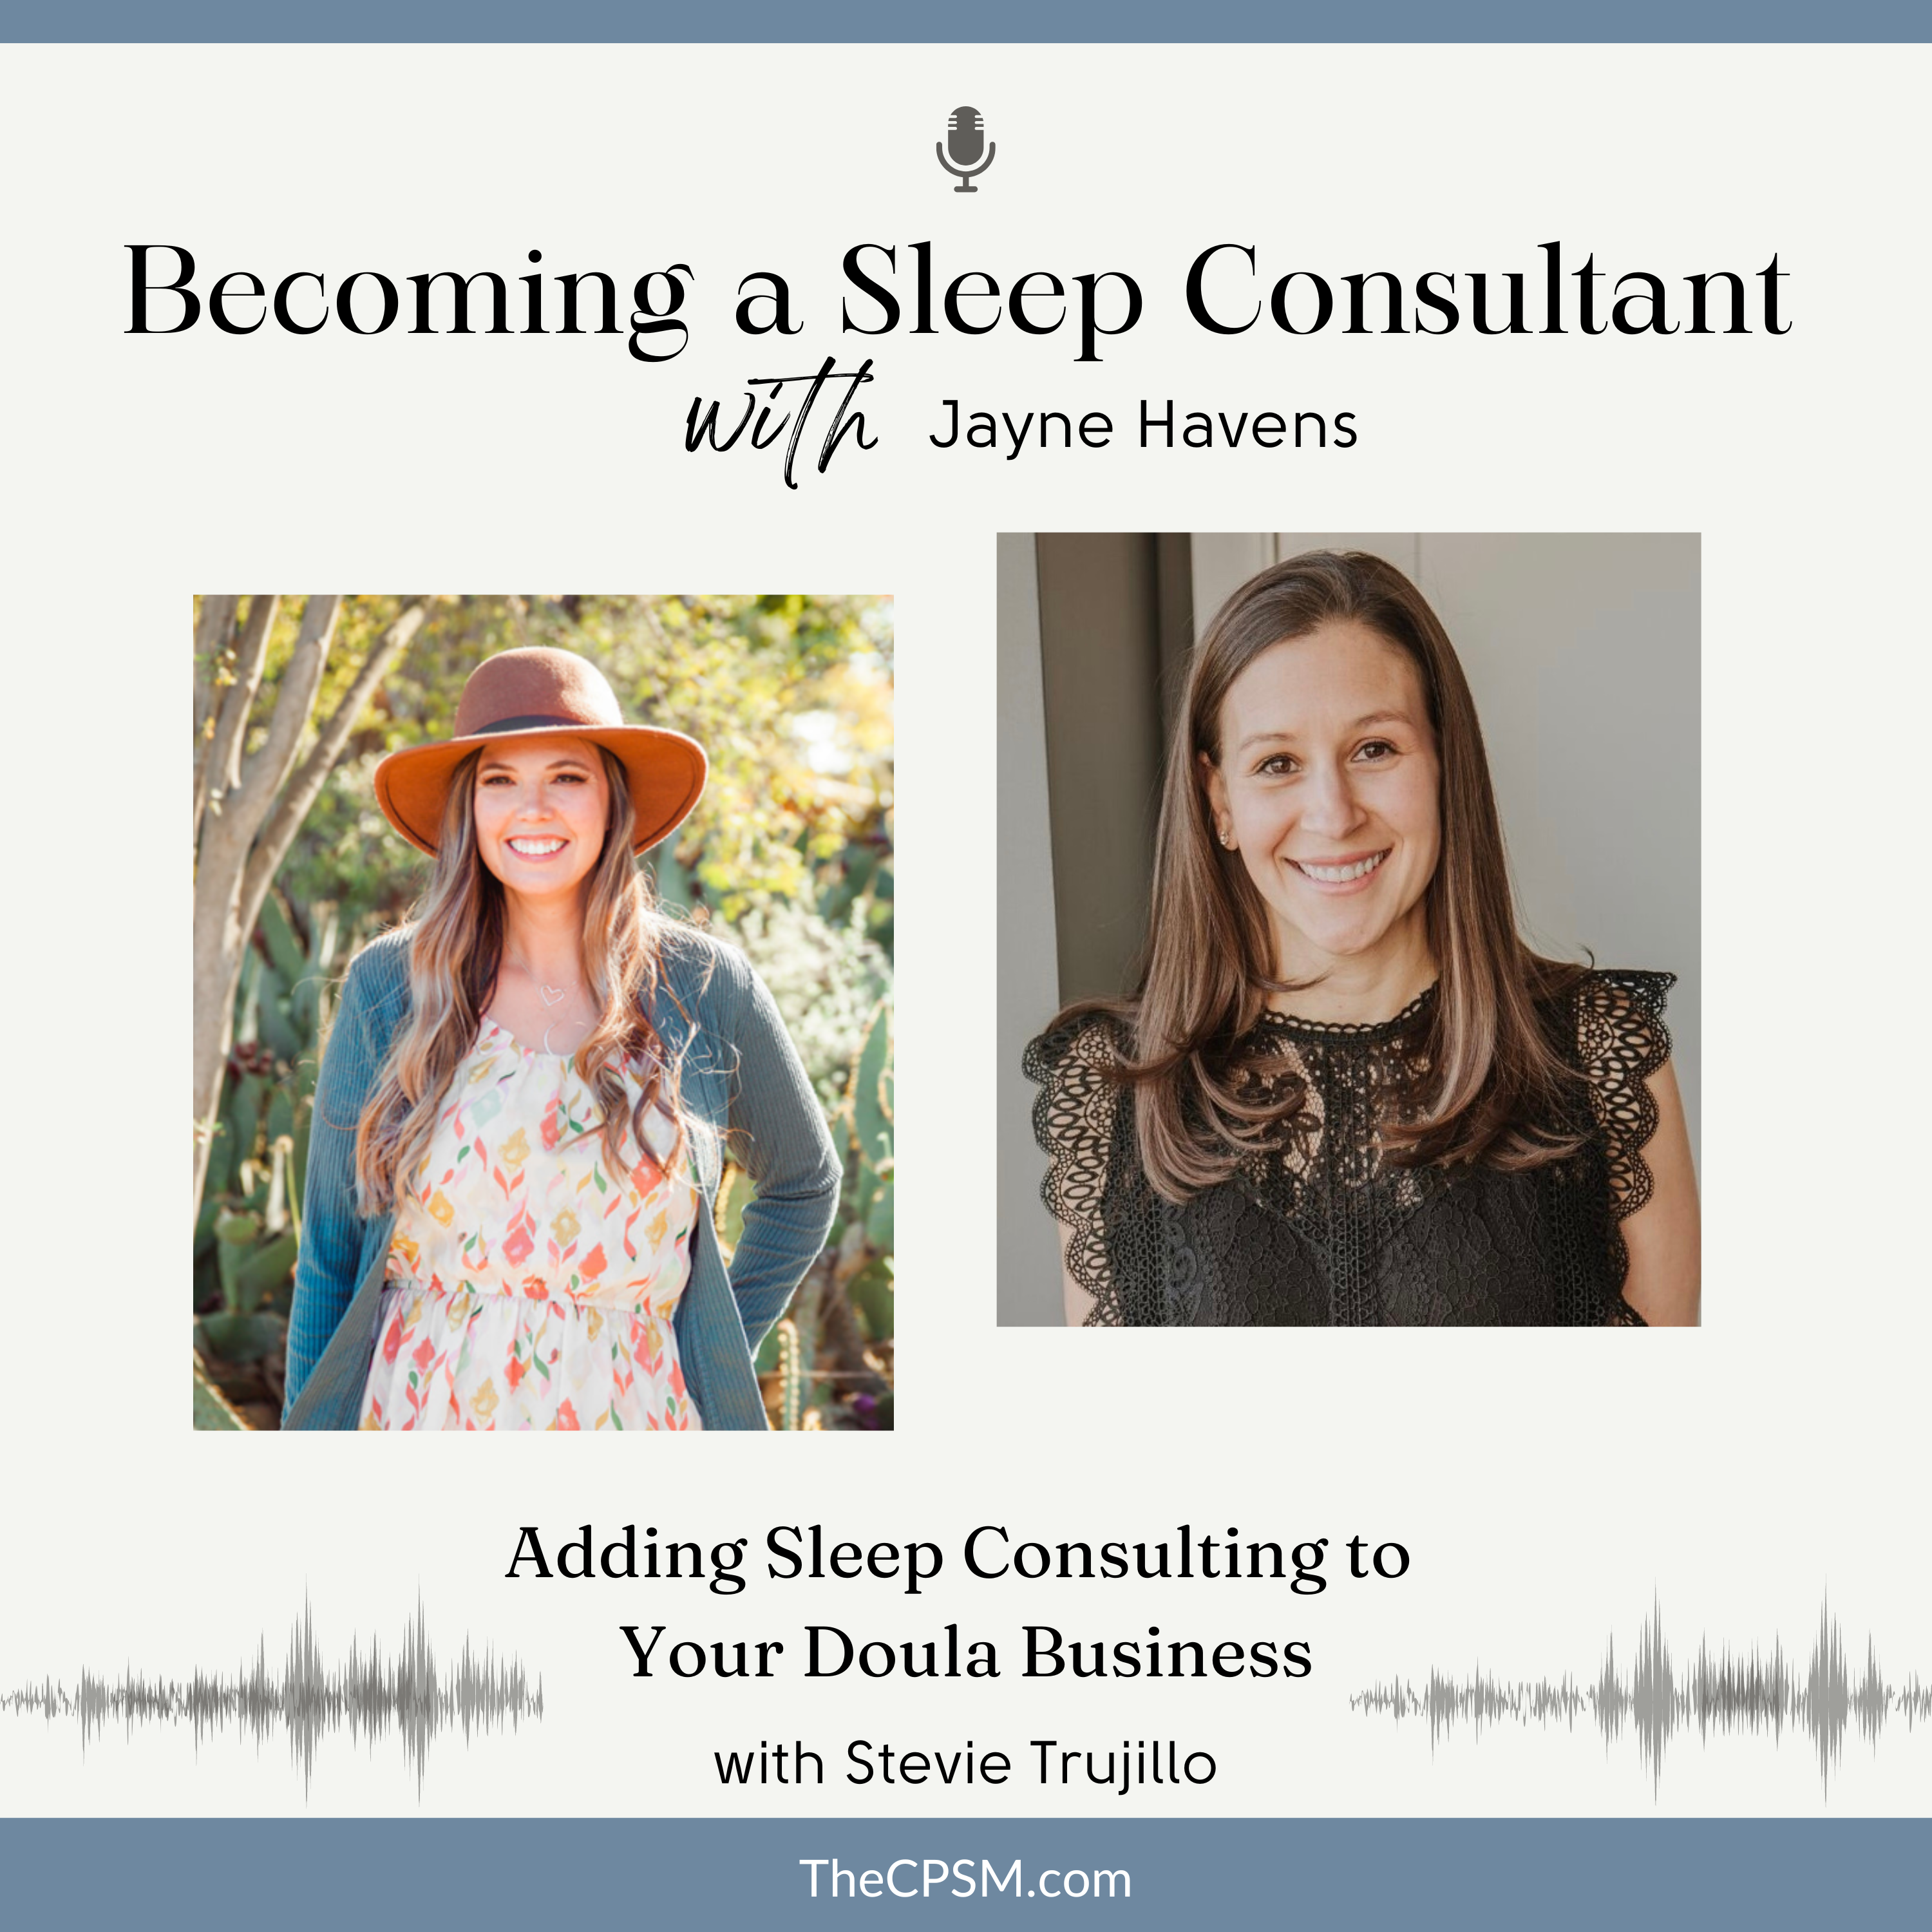 Adding Sleep Consulting to Your Postpartum Doula Business with Stevie Trujillo